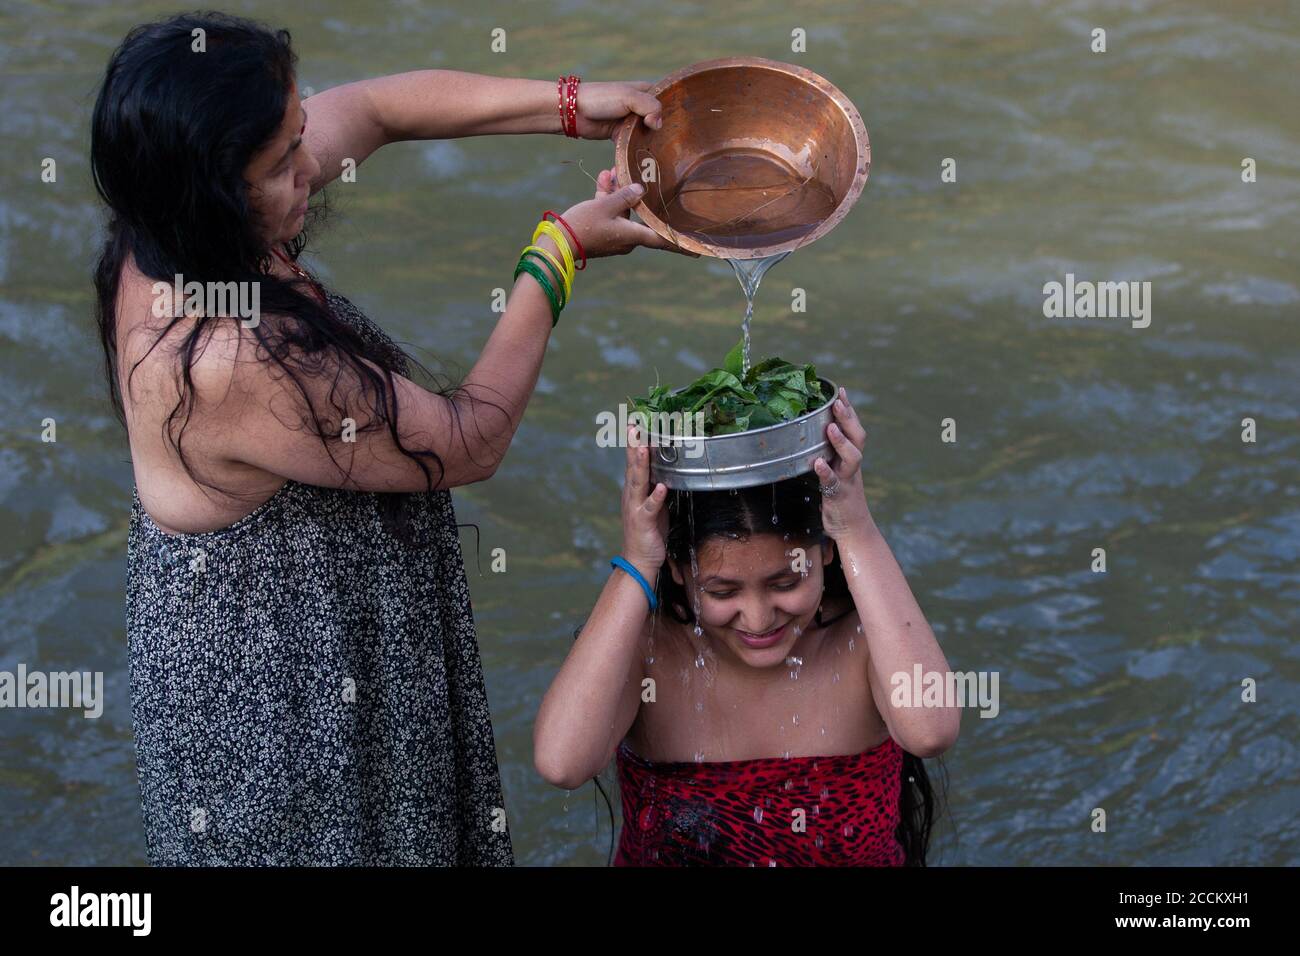 Kathmandu, Nepal. 23rd Aug, 2020. Nepalese Hindu woman takes a holy bath in the Bagmati river during the Rishi Panchami festival.Rishi Panchami is observed on the last day of Teej when women worship Sapta Rishi (Seven Saints) to ask for forgiveness for sins committed during their menstrual period throughout the year. The Hindu religion considers menstruation as a representation of impurity and women are prohibited from taking part in religious practices during their monthly menstruation. Credit: SOPA Images Limited/Alamy Live News Stock Photo